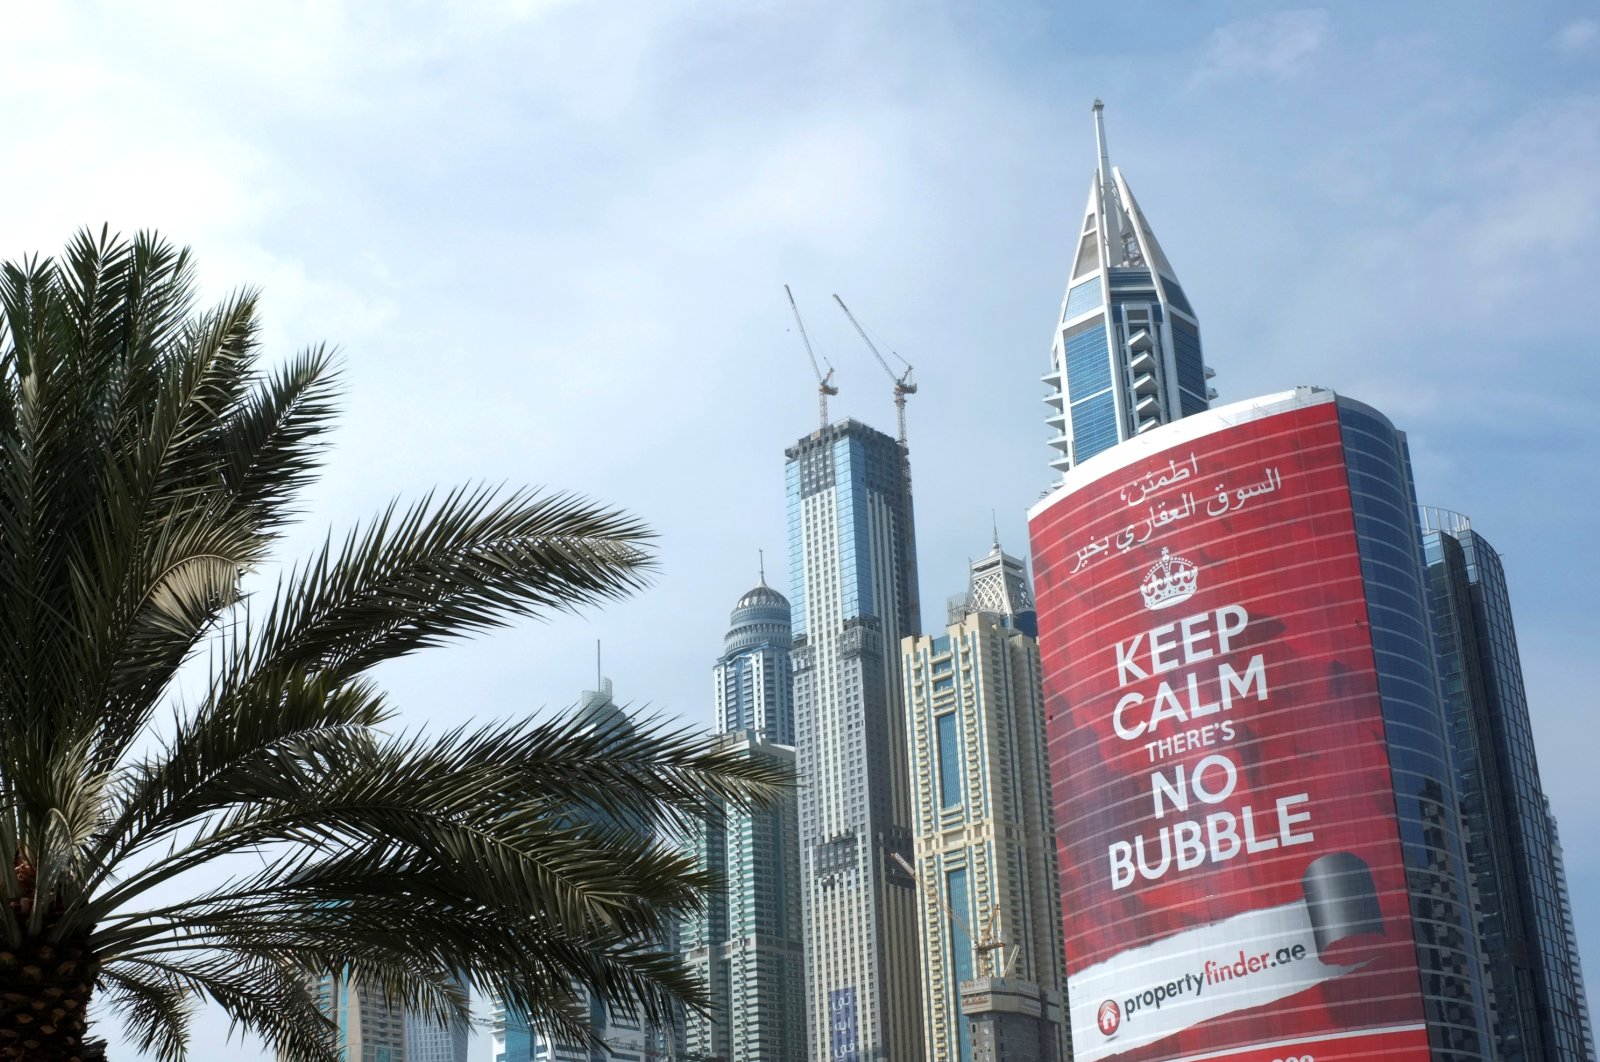 An advertising sign for a real estate company reading "Keep Calm There's no Bubble" is seen on a building in the Marina district of Dubai, United Arab Emirates, Nov. 19, 2013. (Reuters Photo)